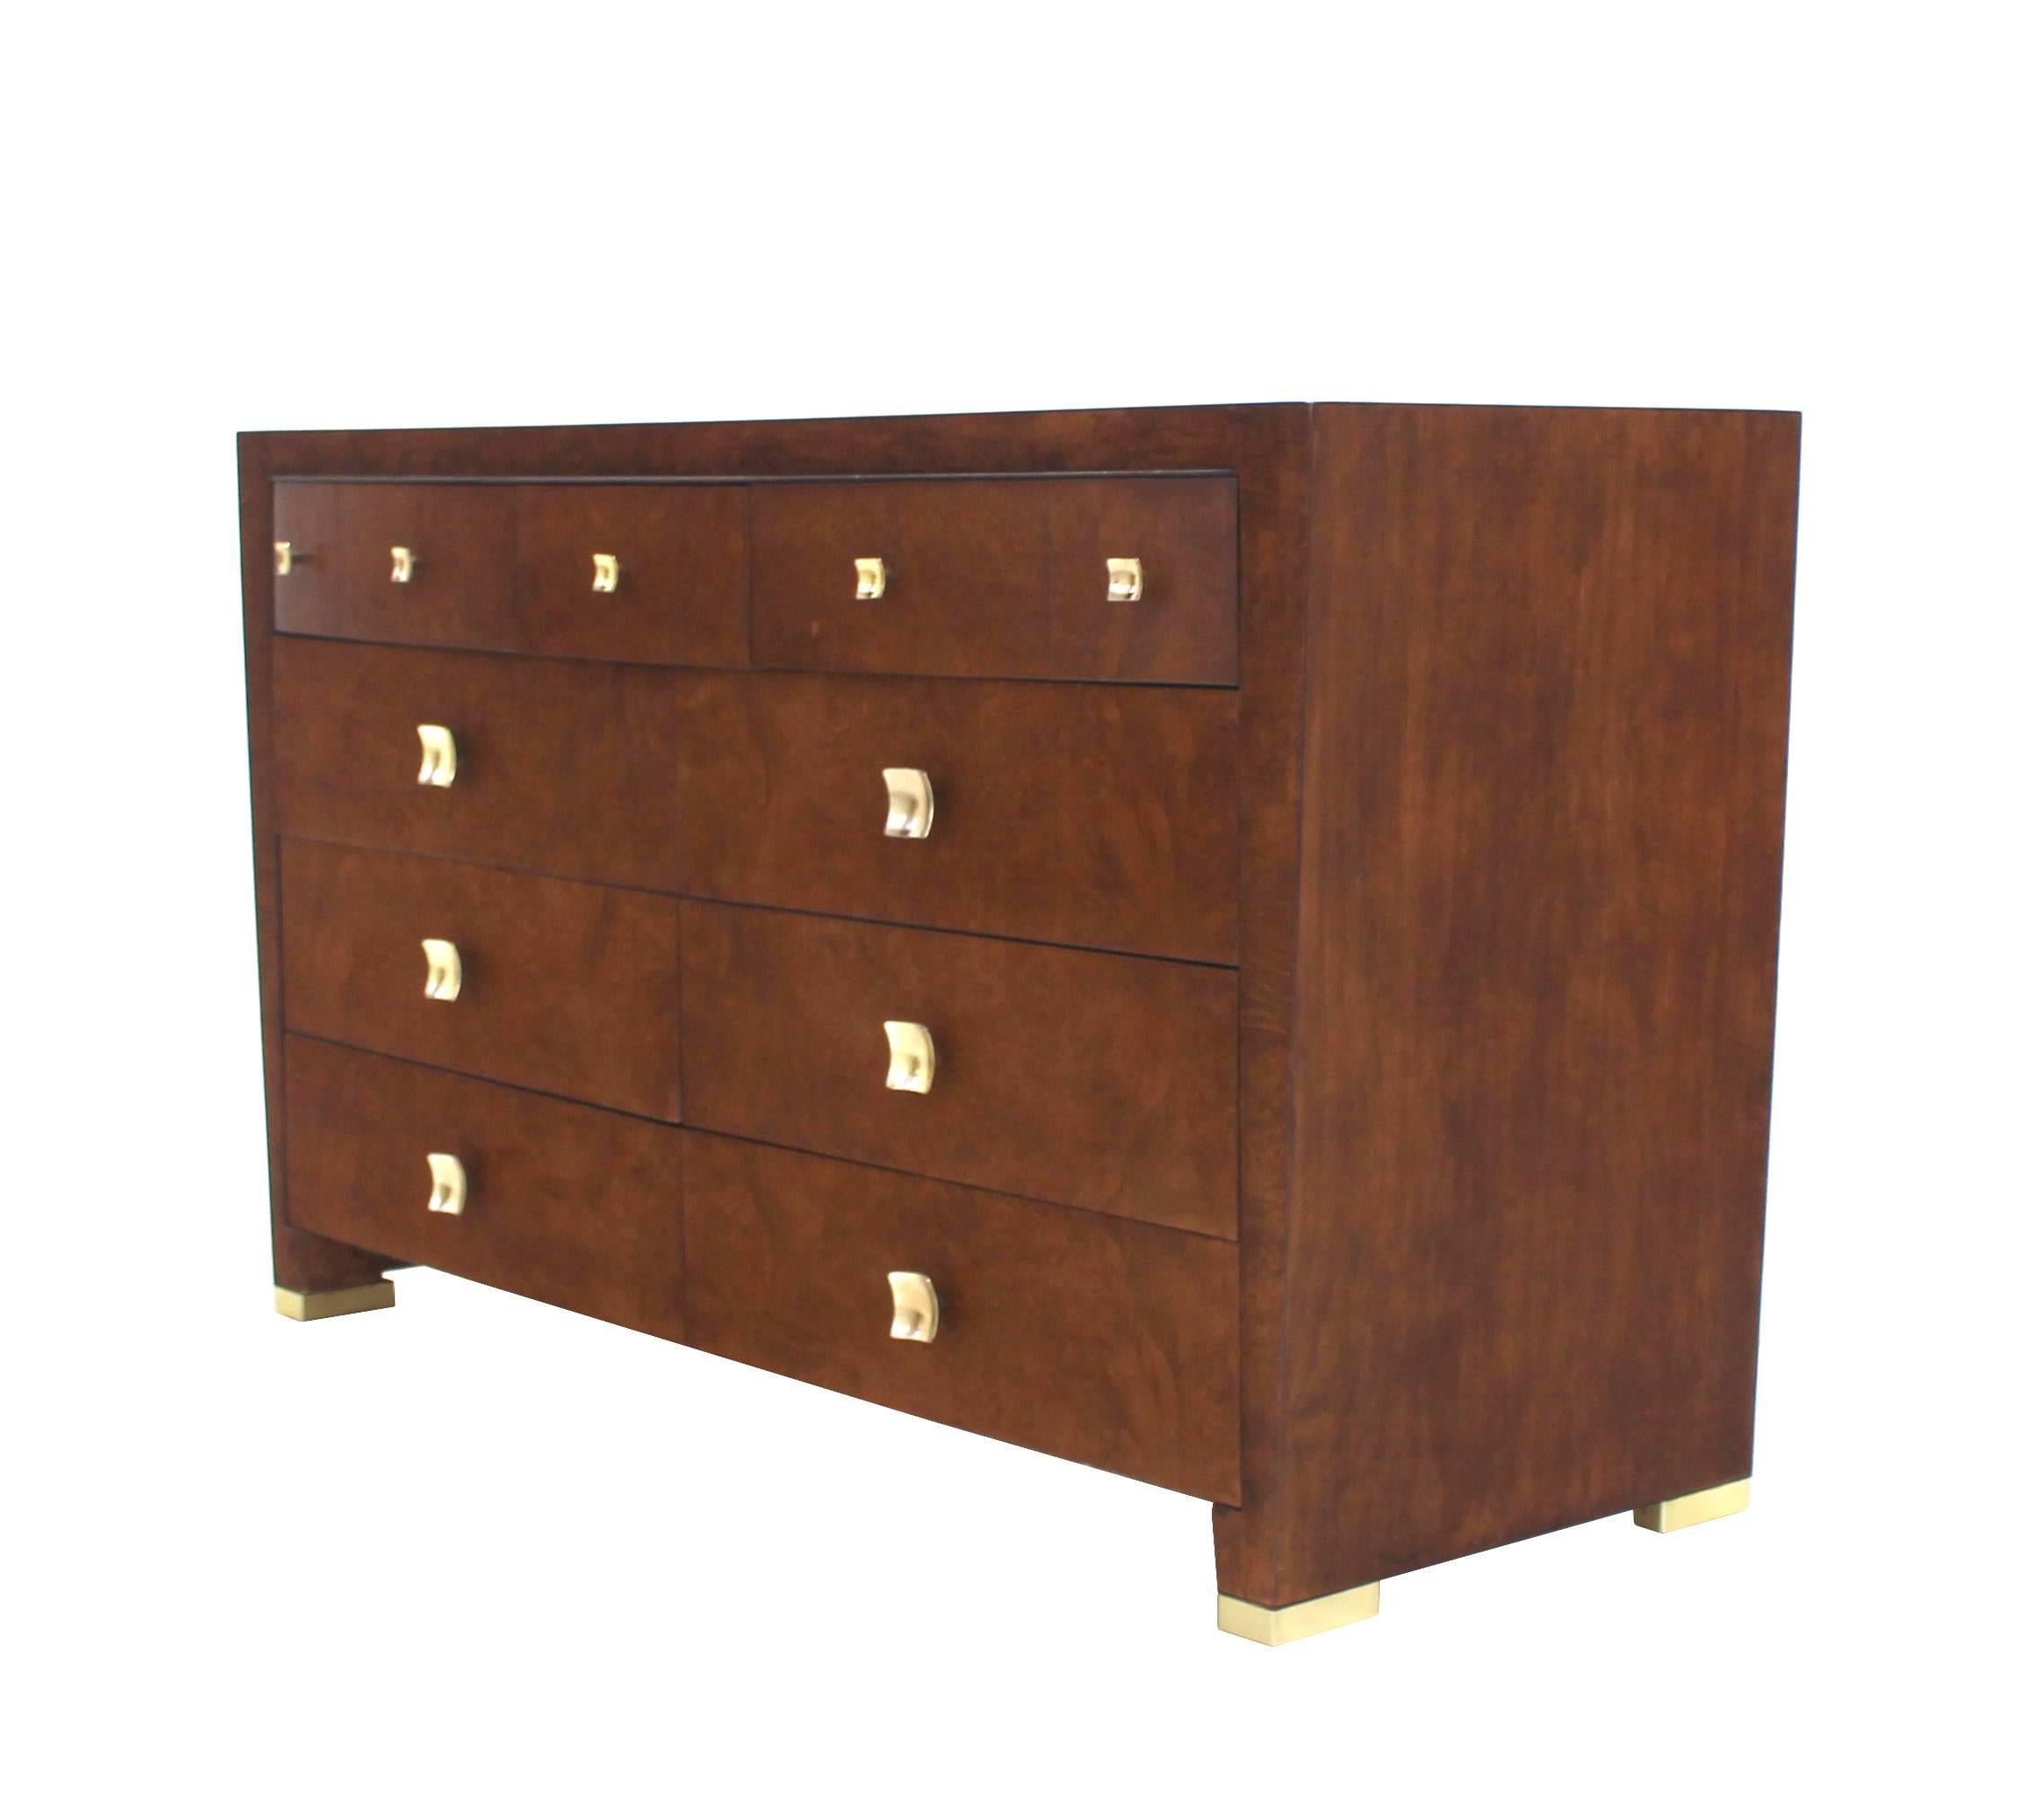 Lacquered Burl Wood Walnut Brass Hardware Pulls Art Deco Dresser Cabinet Chest of Drawers For Sale